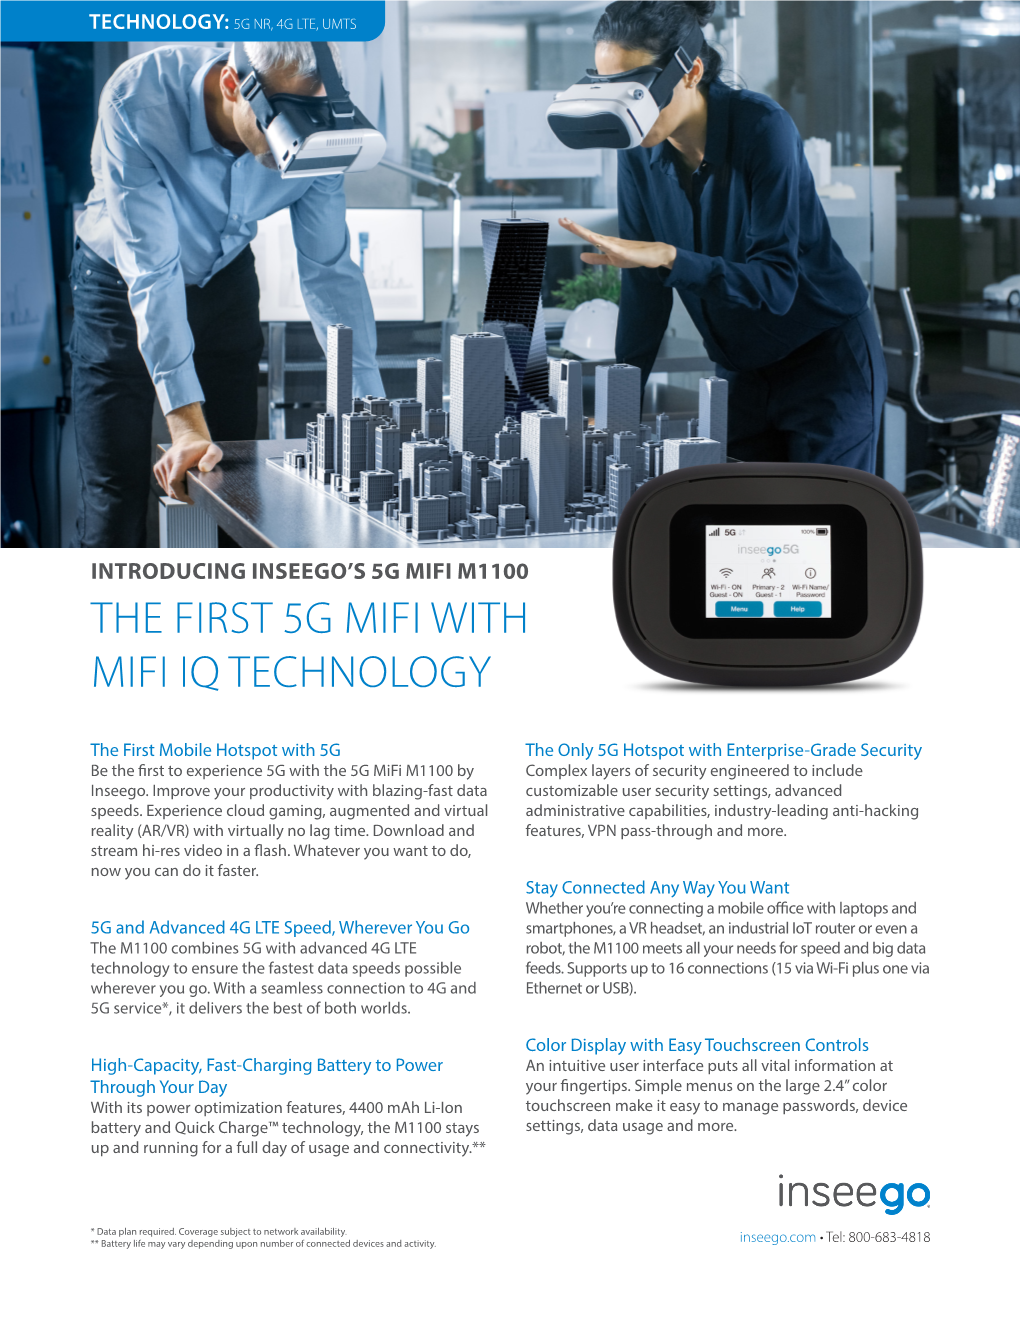 The First 5G Mifi with Mifi Iq Technology